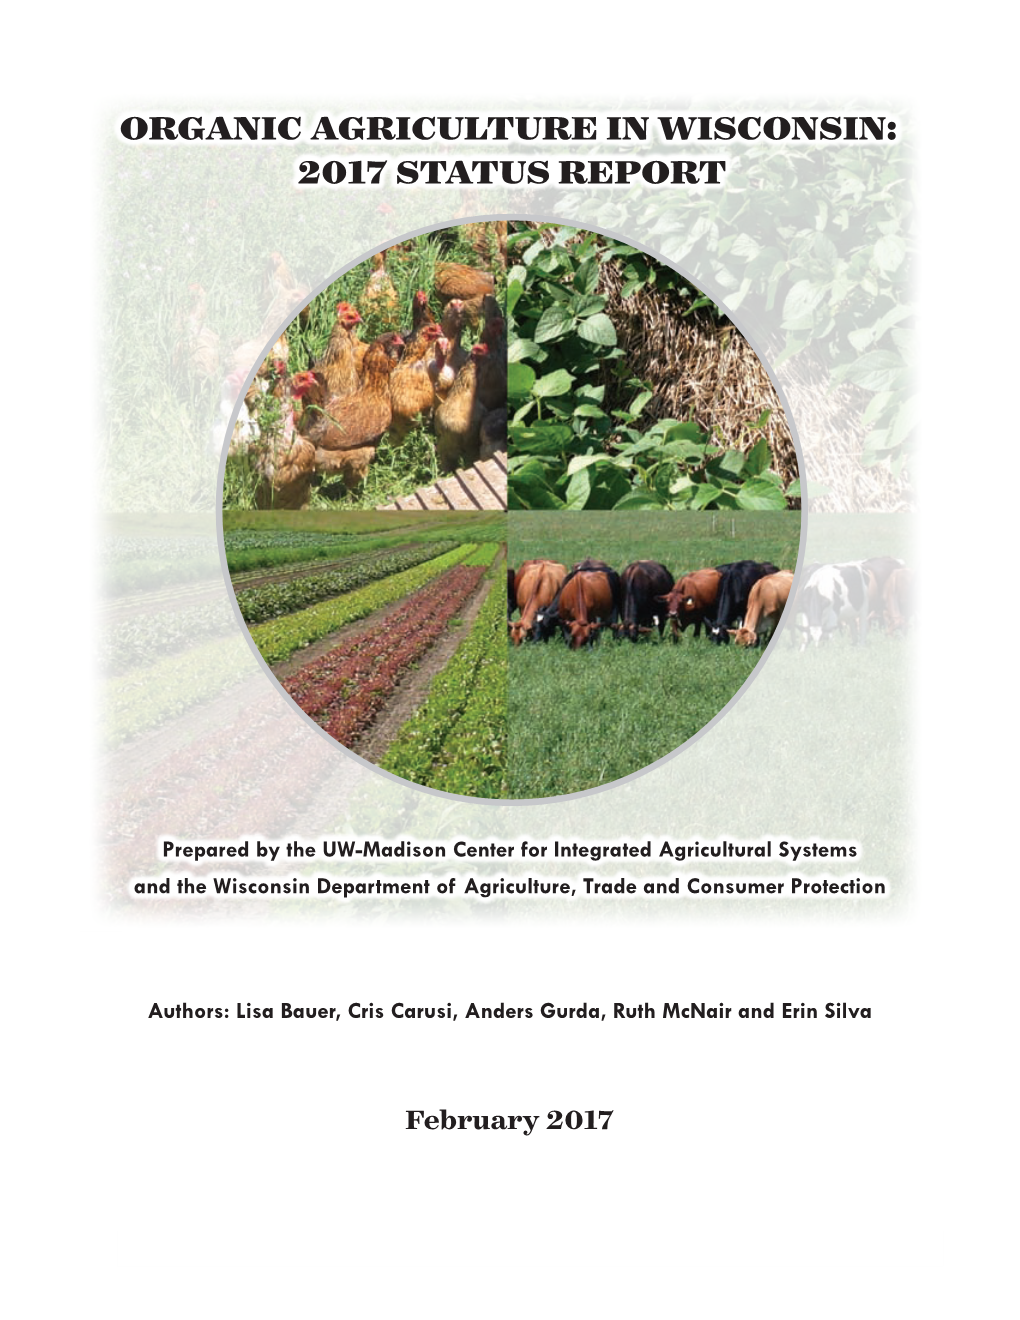 Organic Agriculture in Wisconsin: 2017 Status Report